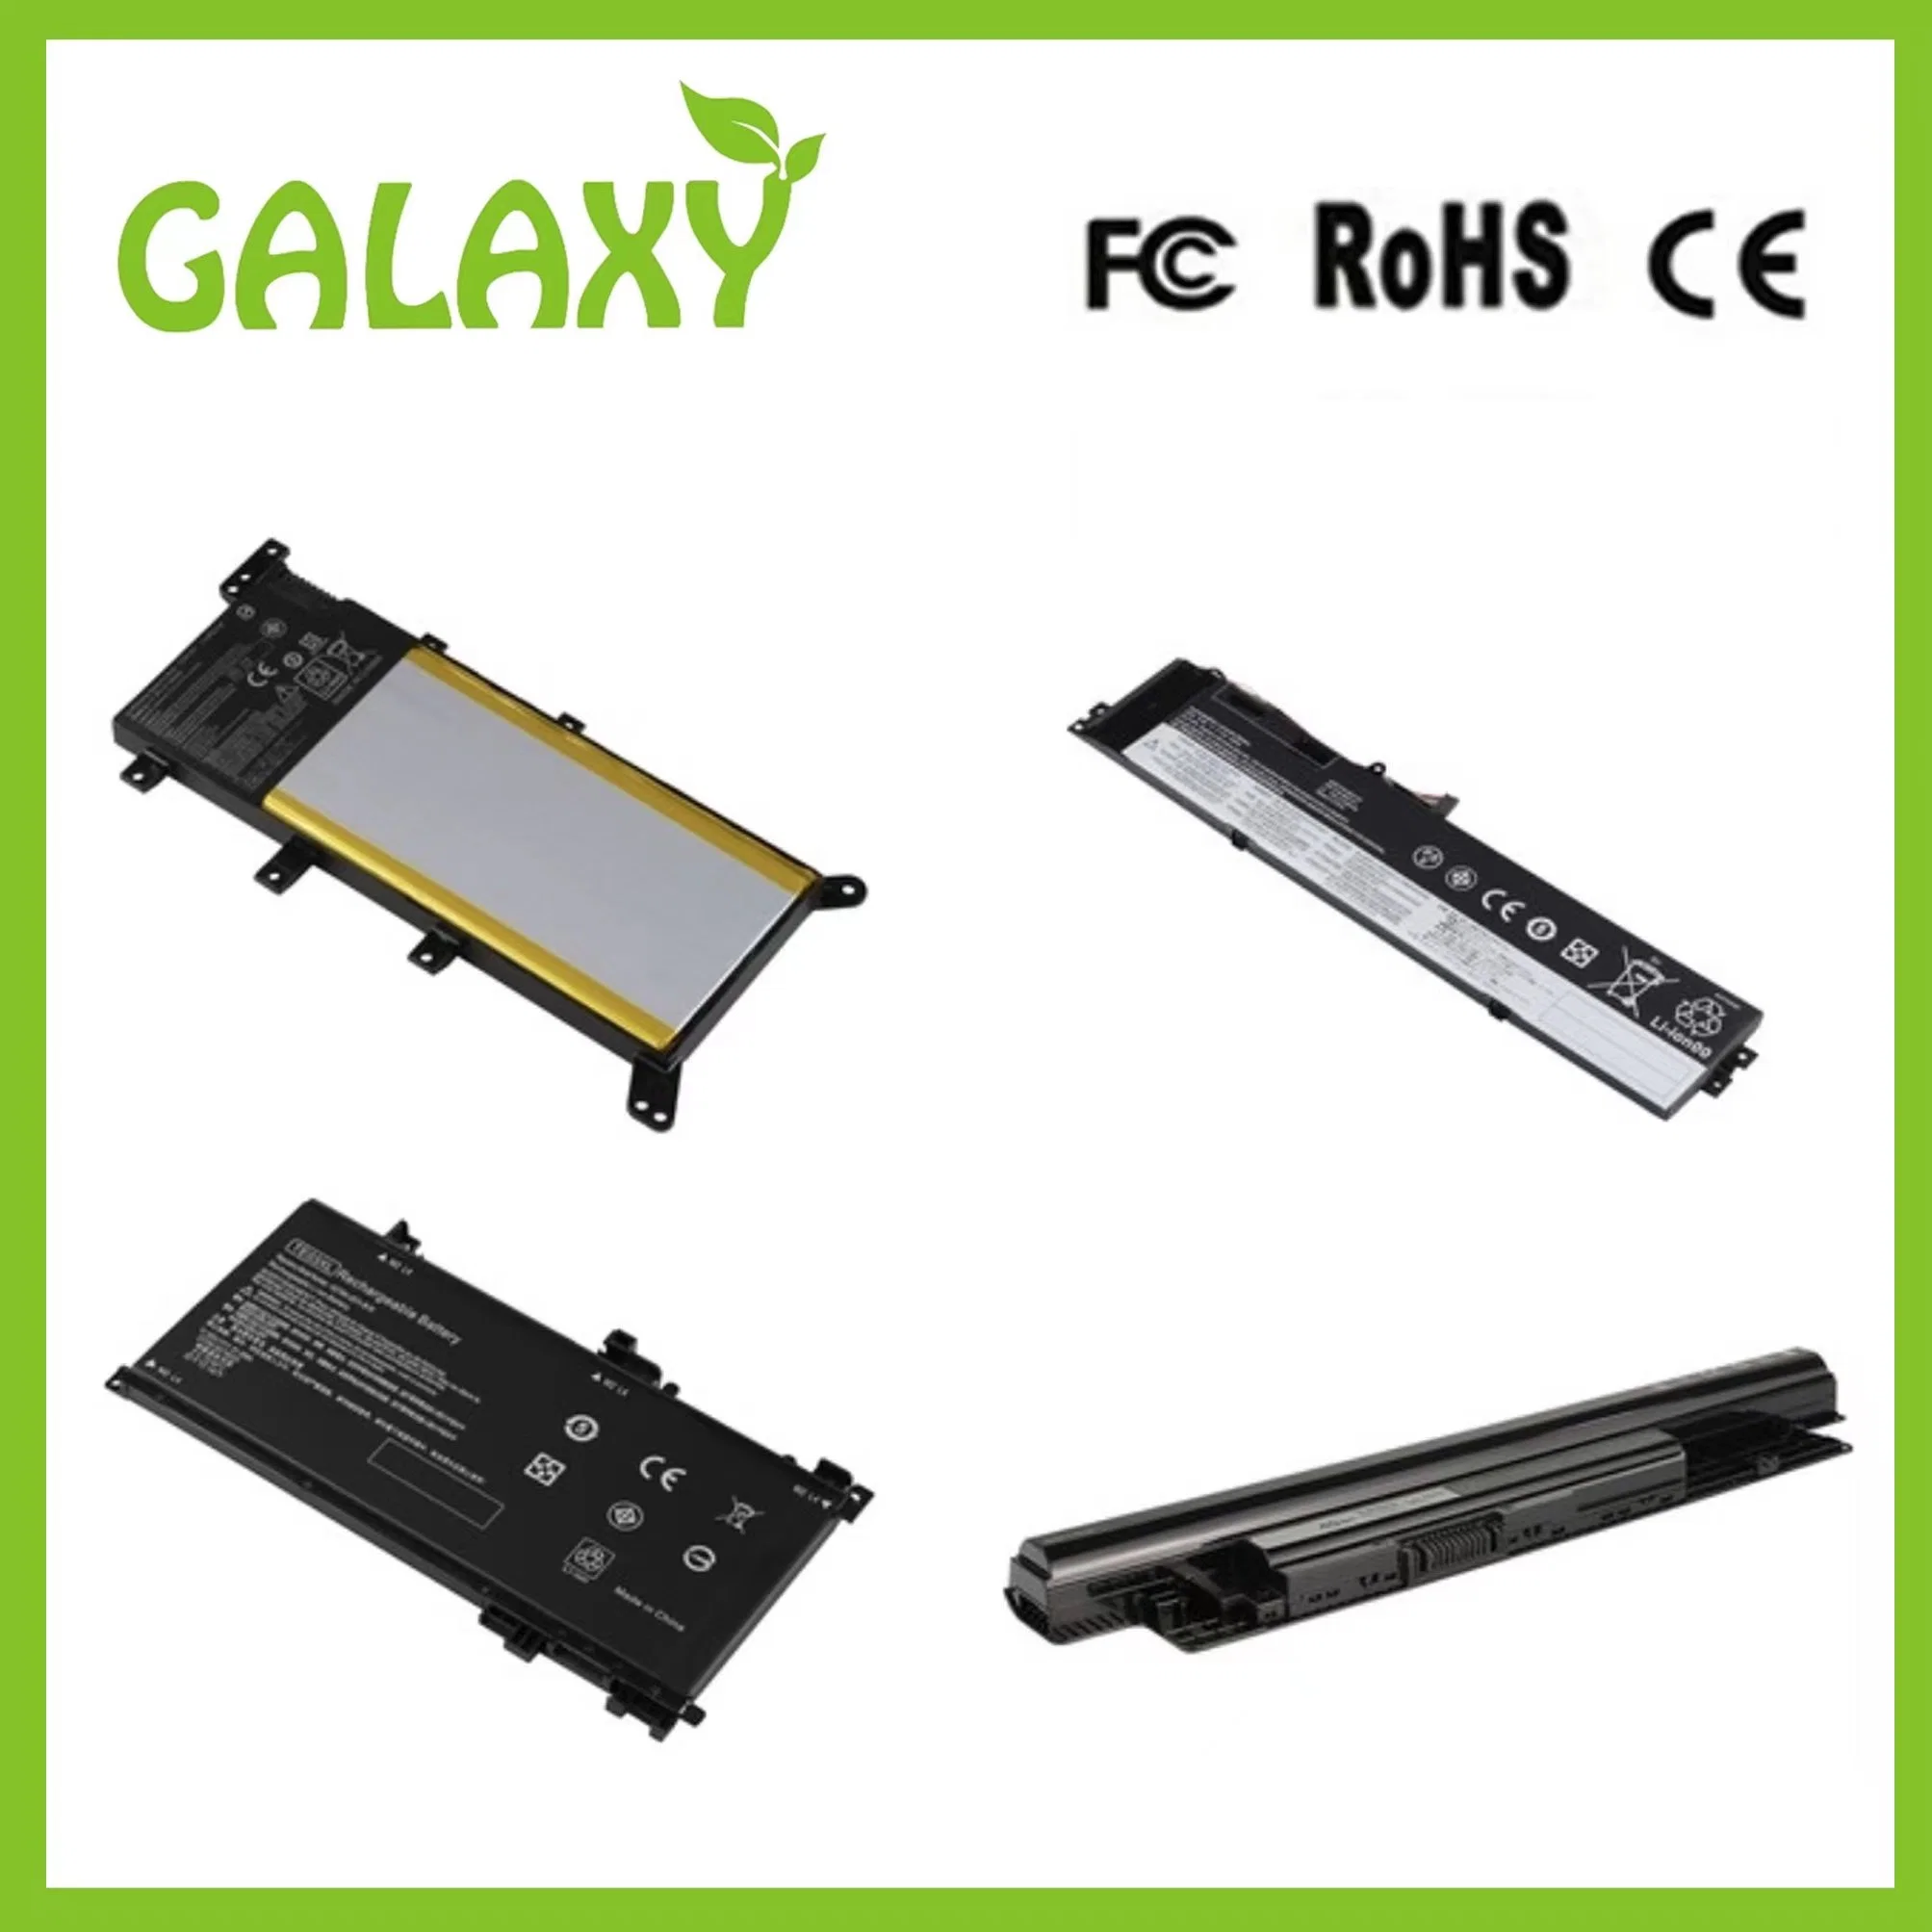 Replacement Batteries for Asus A31n1302 0b110-00240100e Laptop Battery High Quality